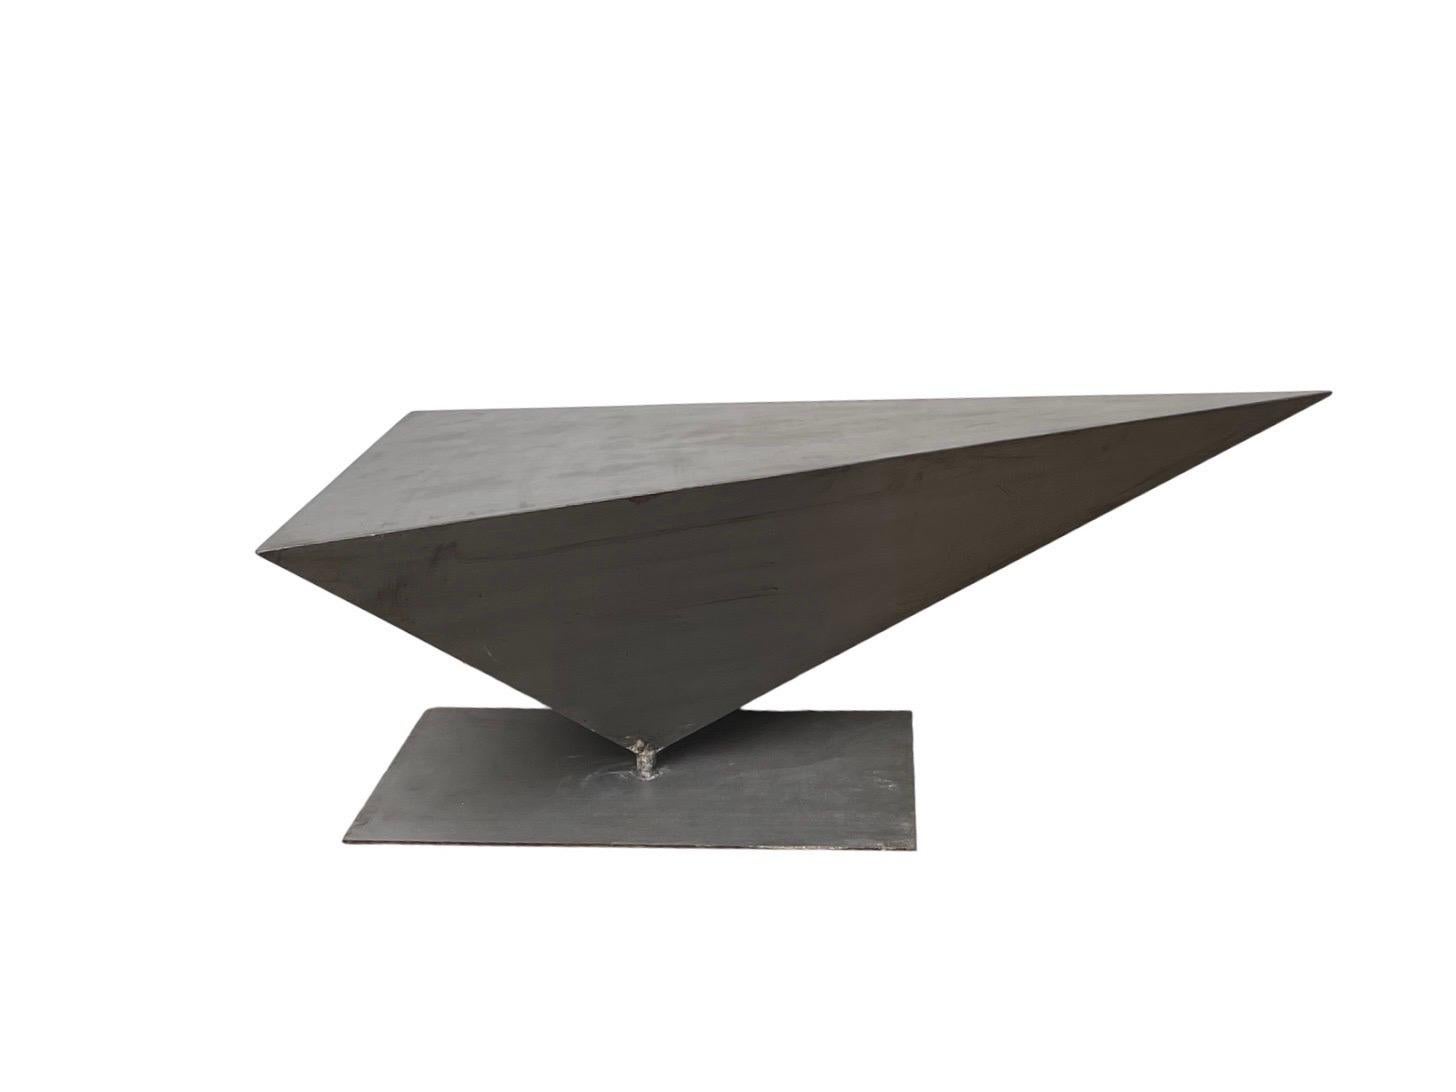 1980s Angular Steel Sculptured Coffee Table In Good Condition For Sale In Bensalem, PA